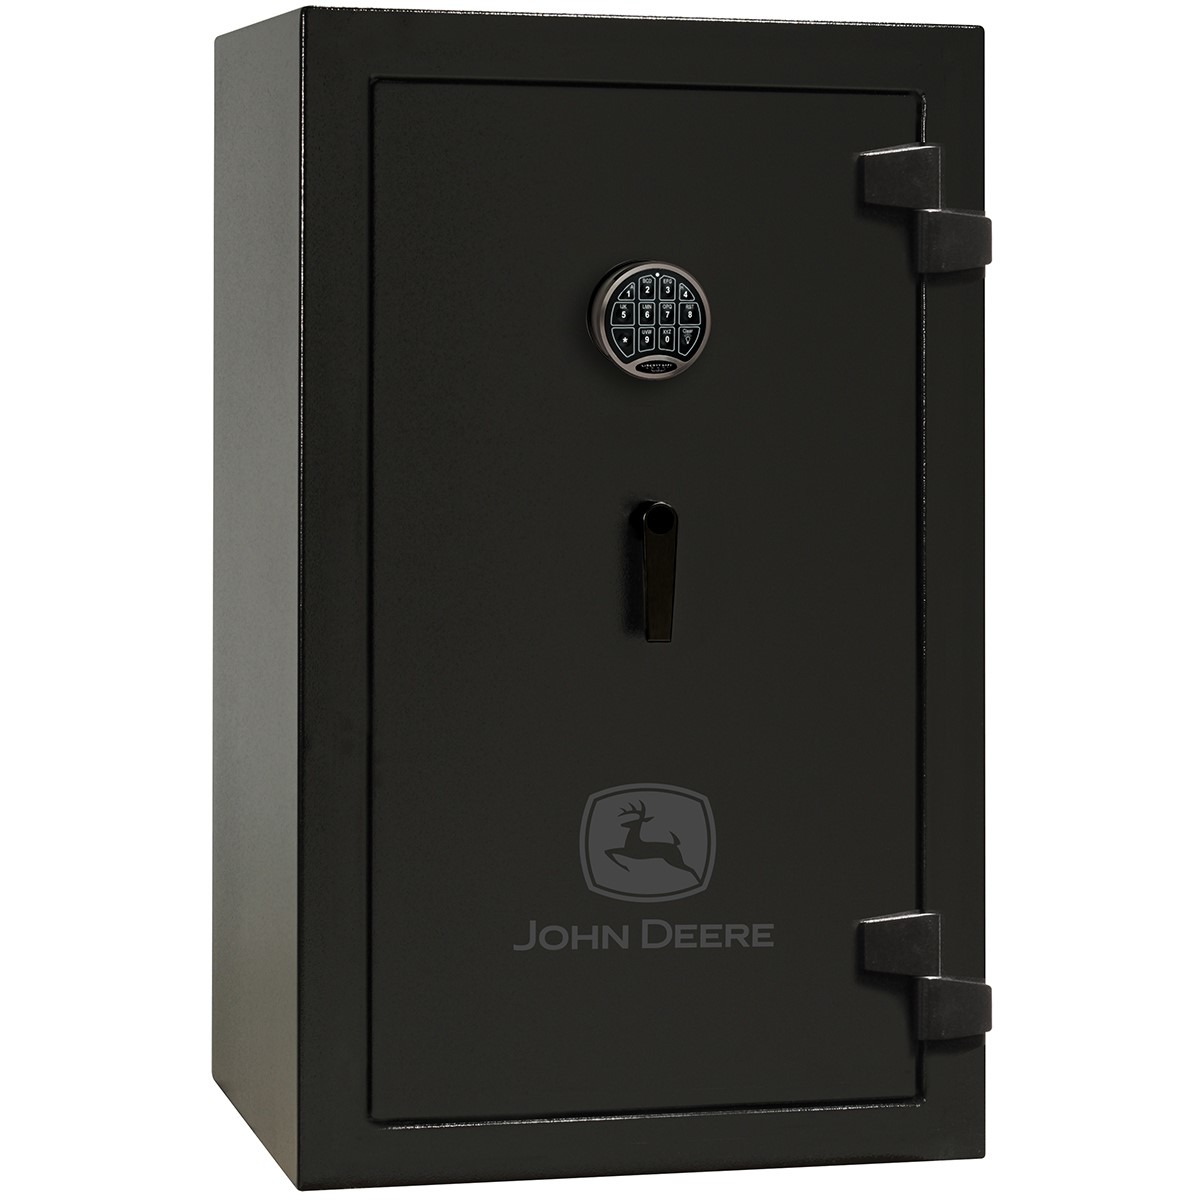 Home Series Black Textured Security Safe